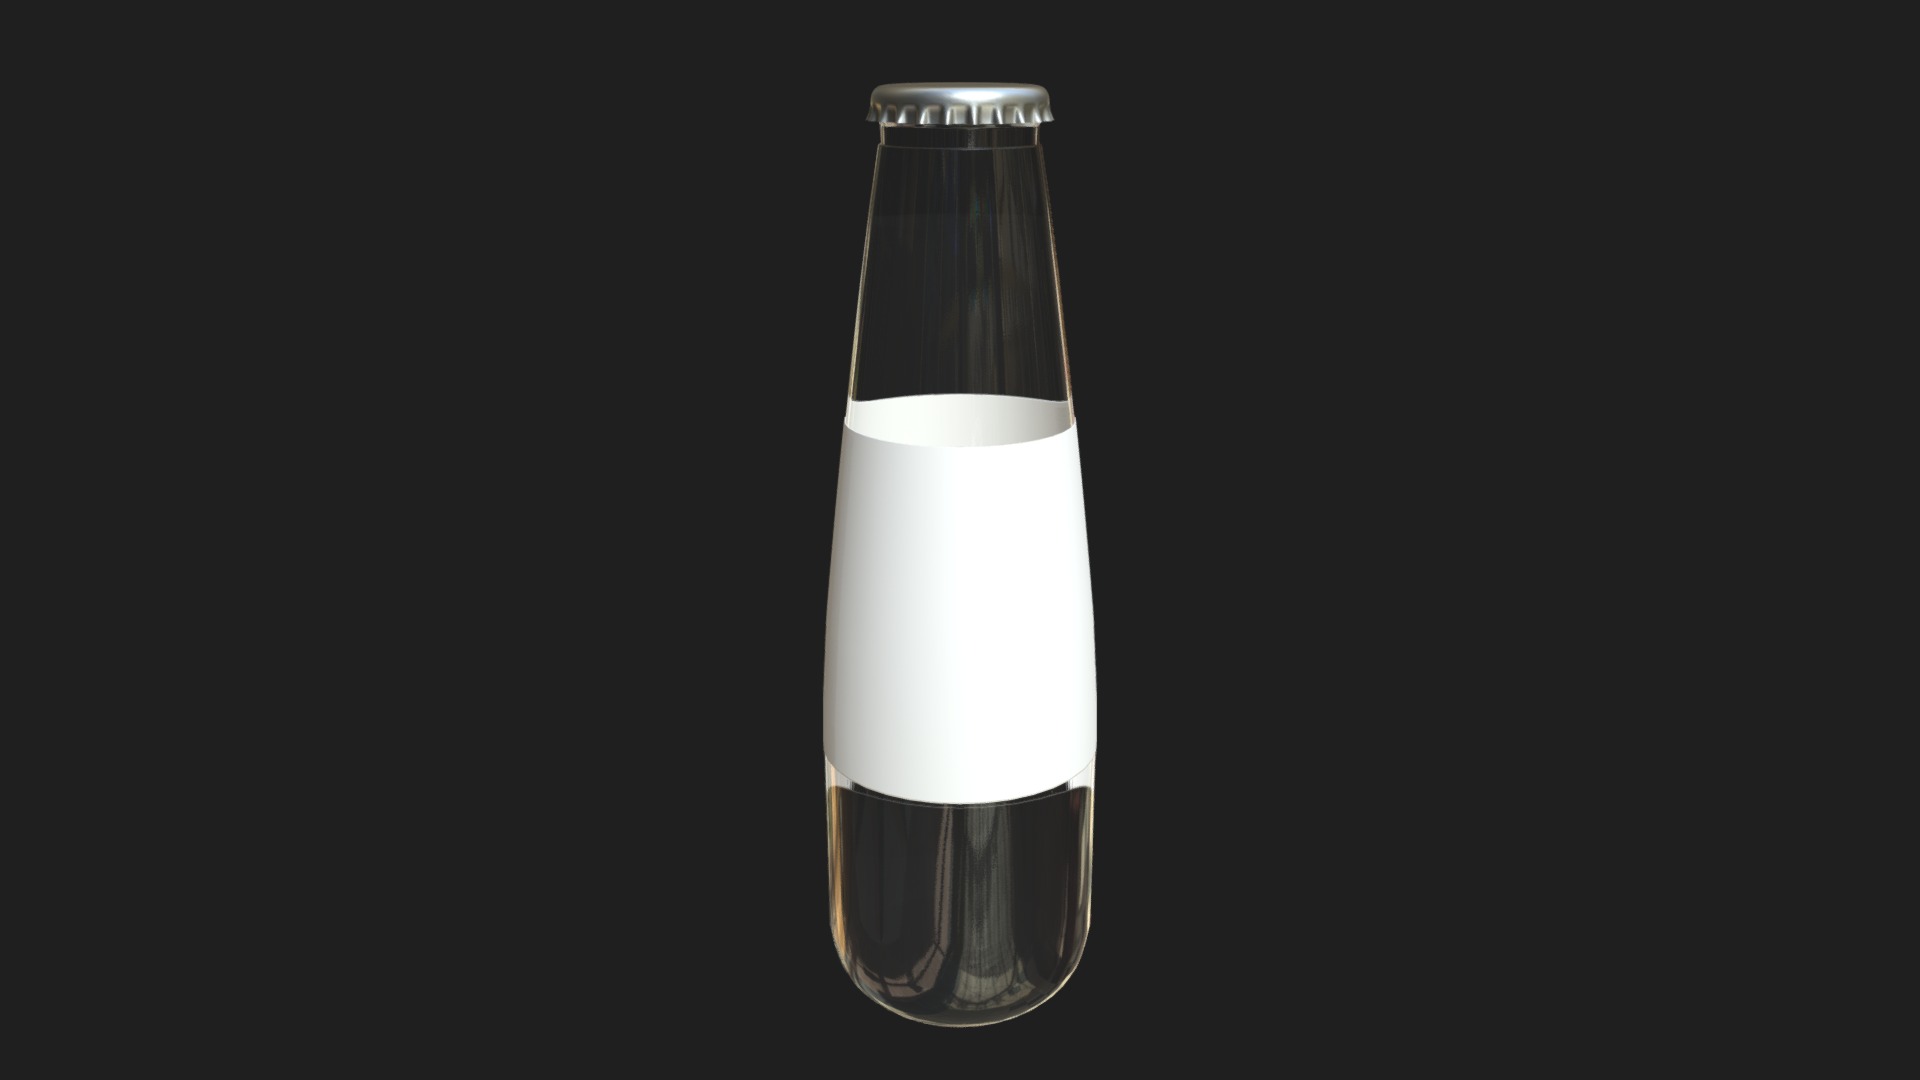 3D model Small aperitif bottle - This is a 3D model of the Small aperitif bottle. The 3D model is about a glass bottle with a white cap.